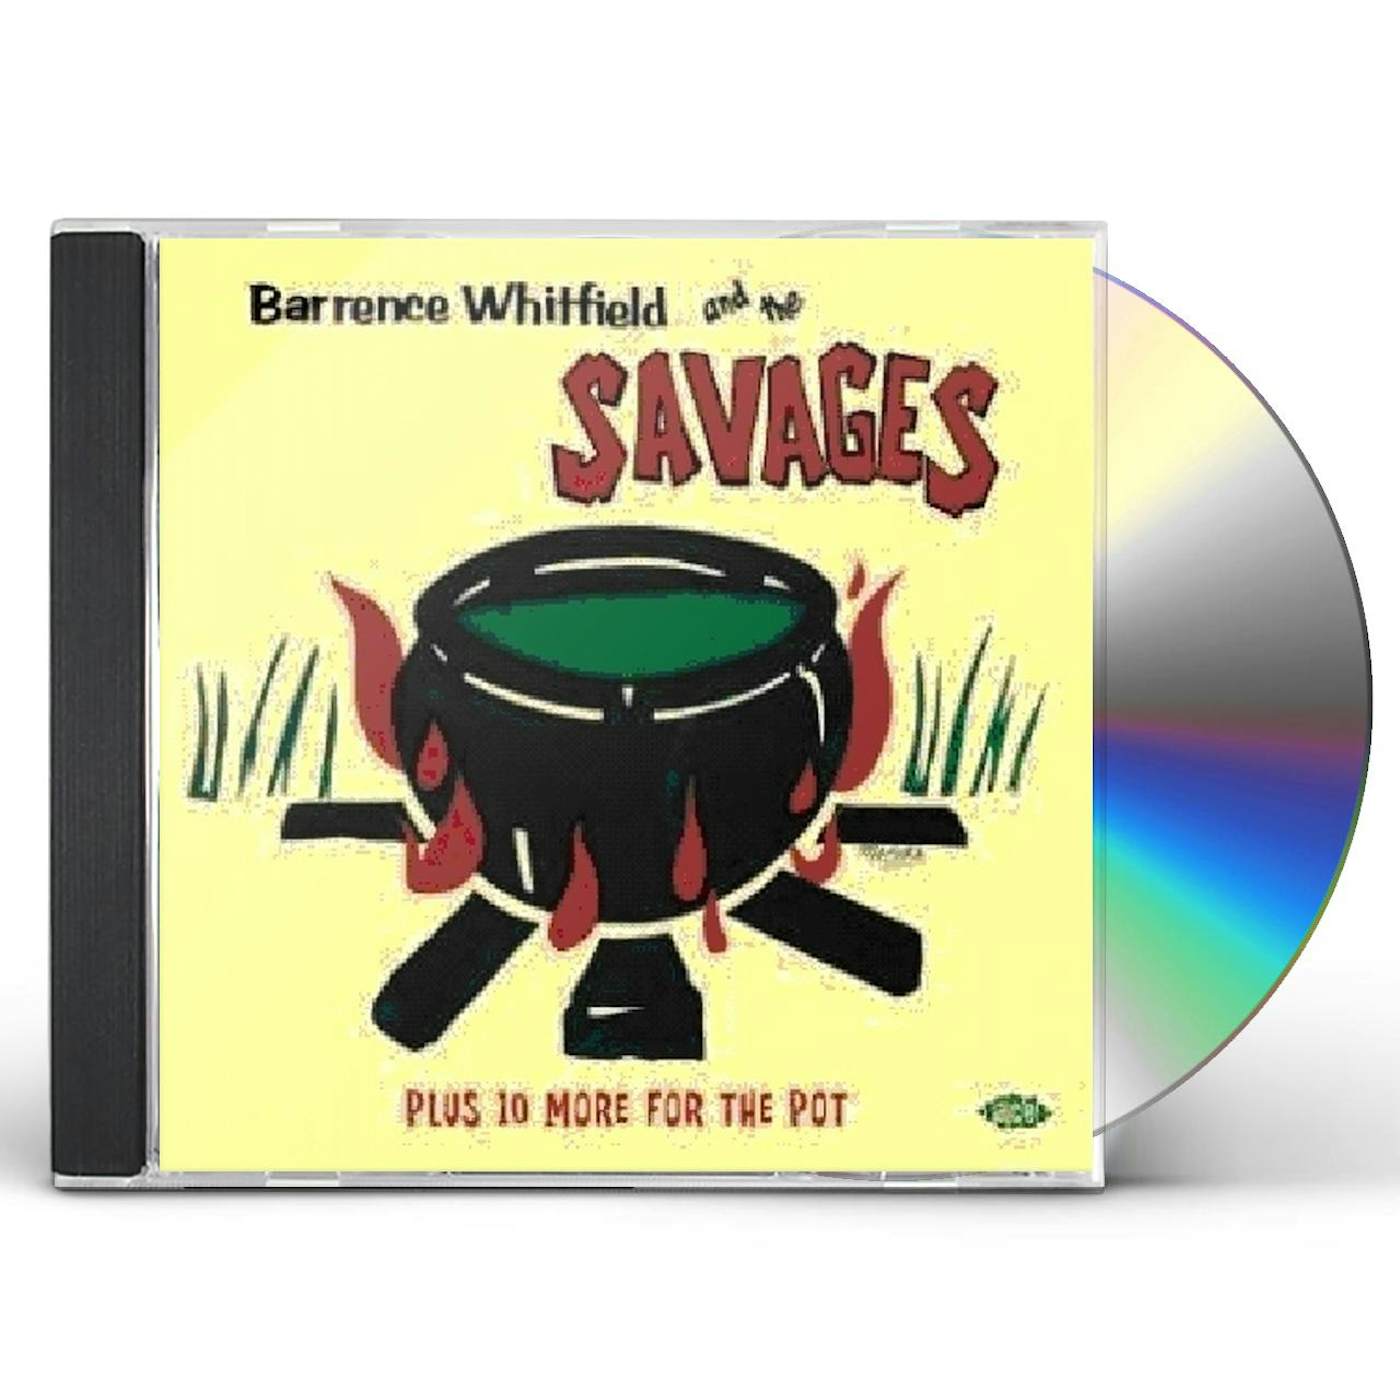 BARRENCE WHITFIELD & THE SAVAGES CD